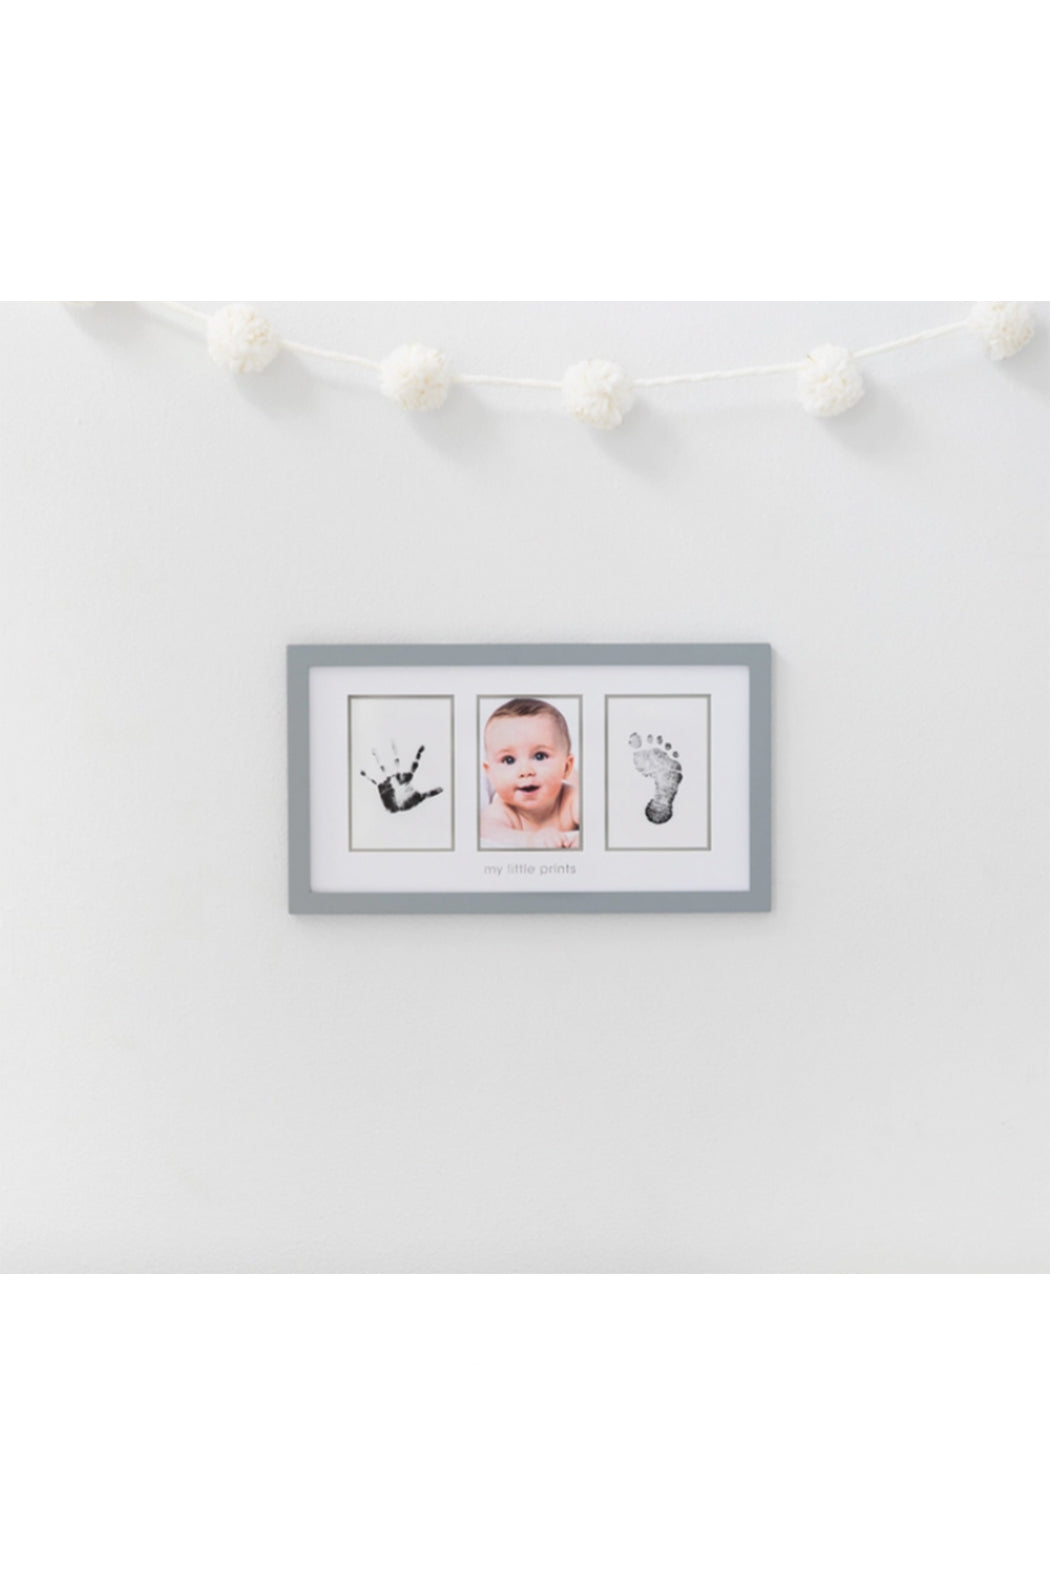 Pearhead Babyprints Photo Wall Frame & Clean Touch Ink Kit